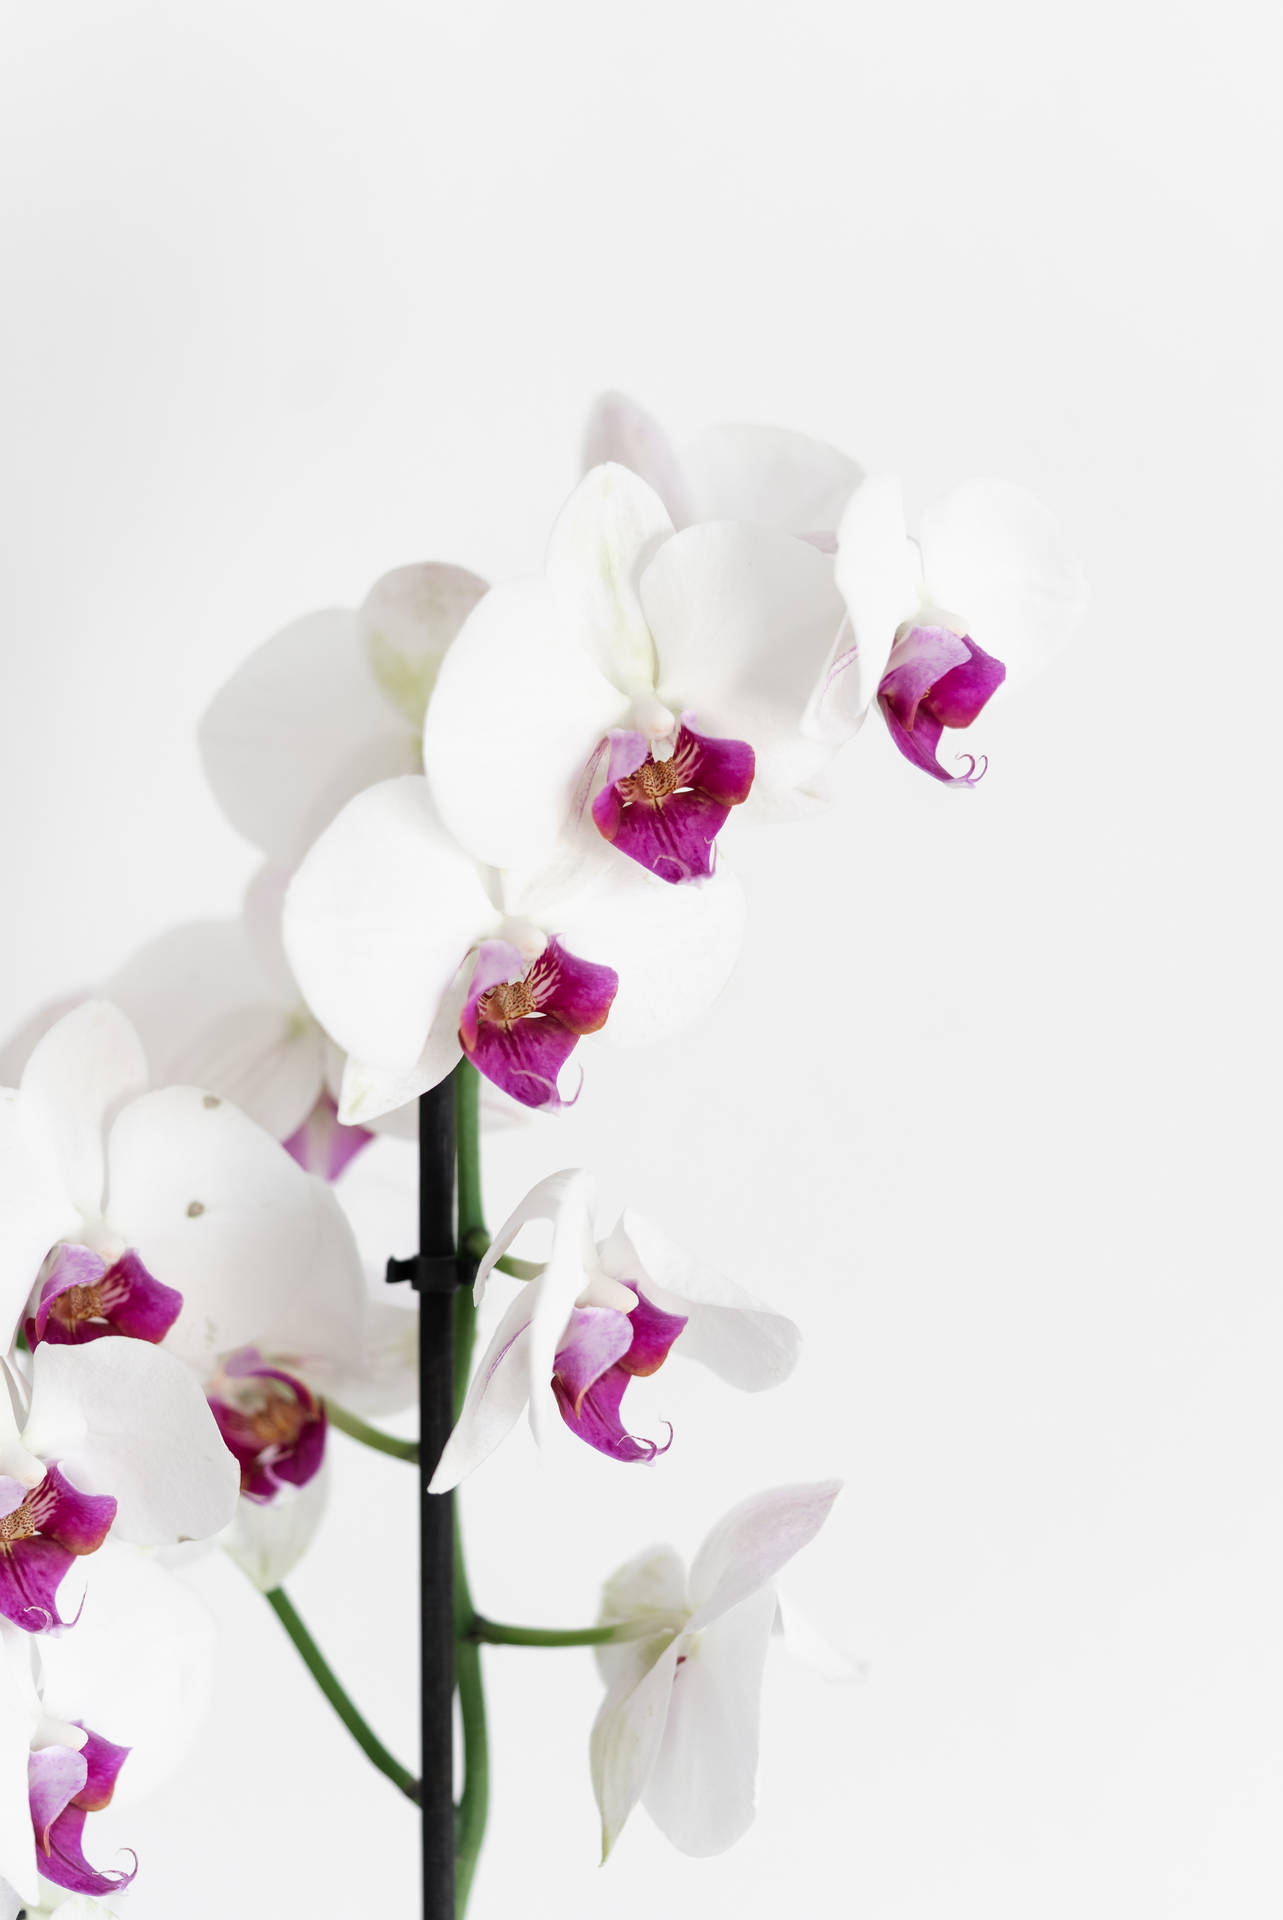 Phalaenopsis Aphrodite Orkide Blomme Android Tapet Wallpaper